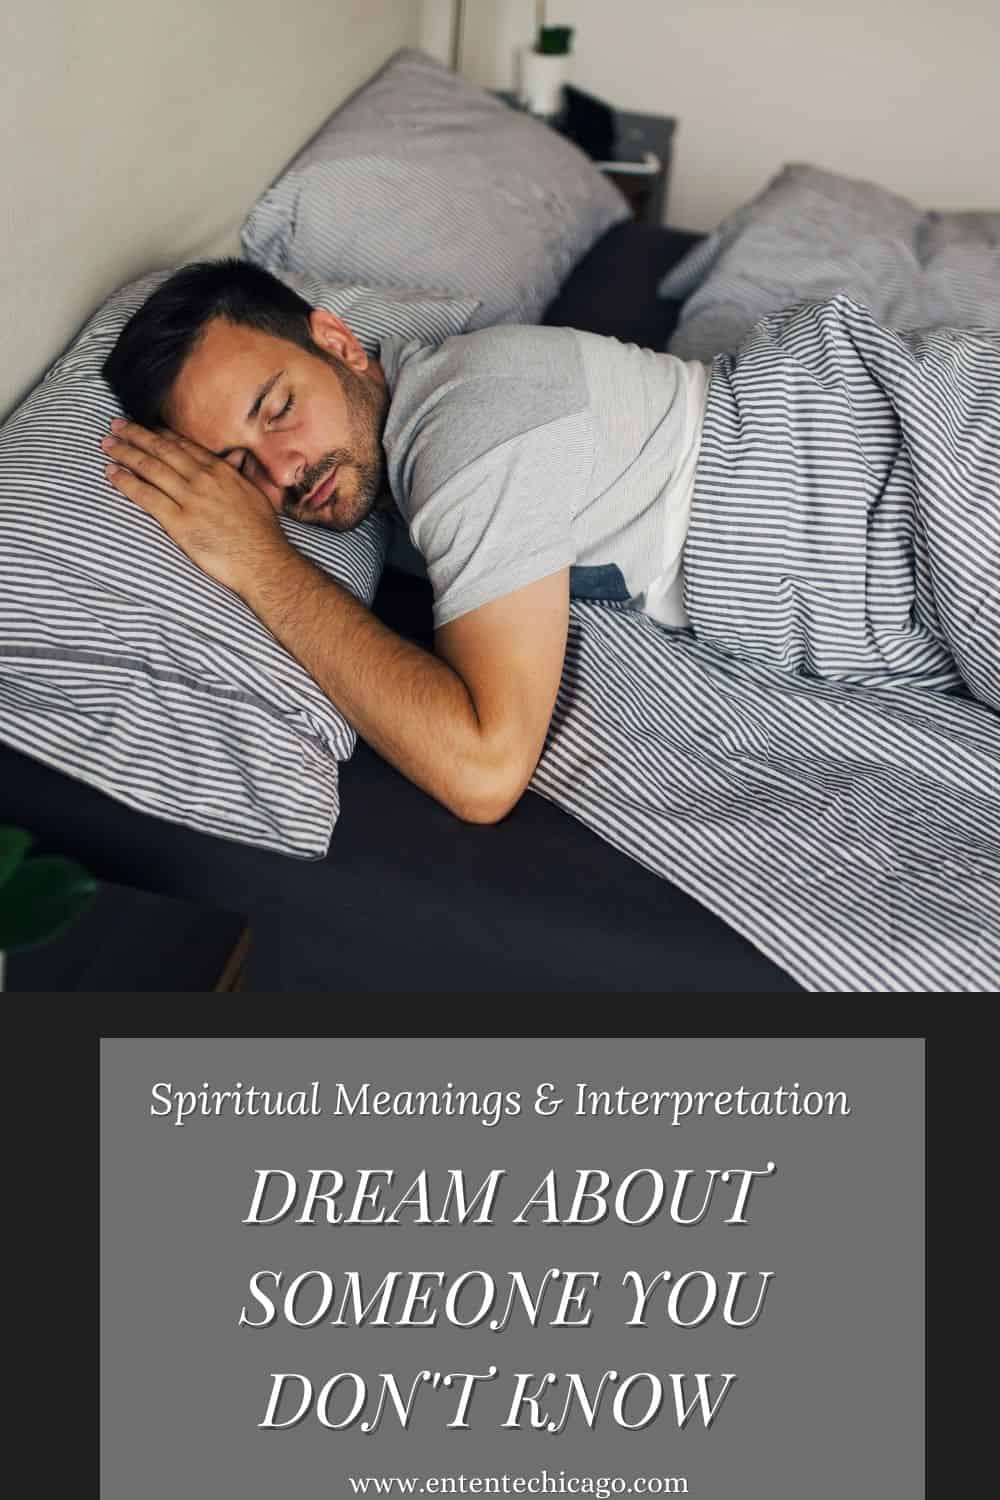 Dream About Someone You Don't Know (Spiritual Meanings & Interpretation)